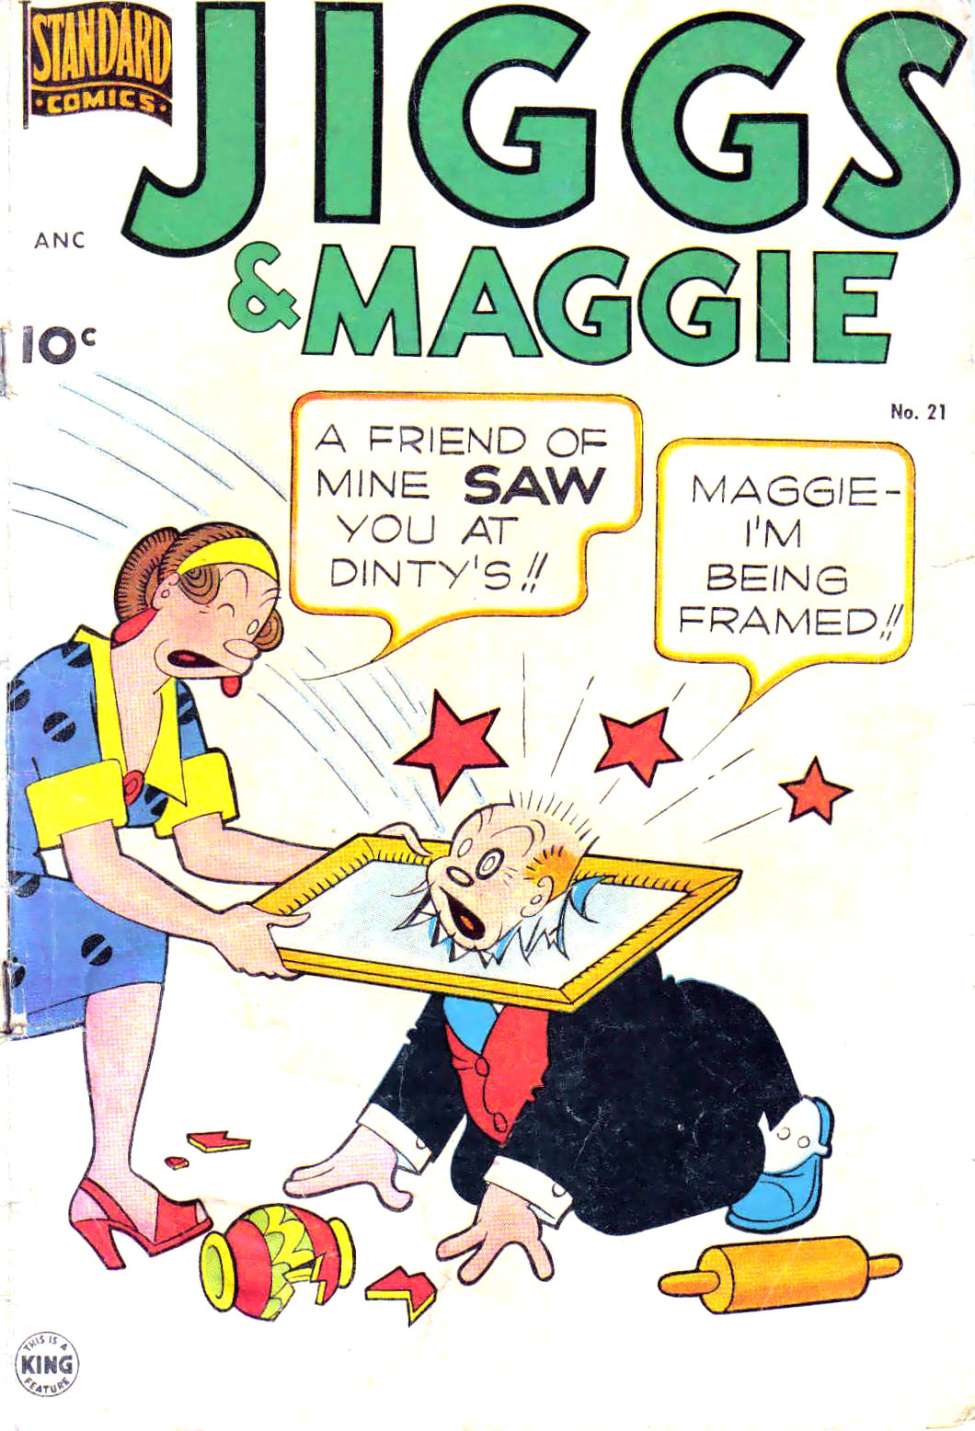 Book Cover For Jiggs & Maggie 21